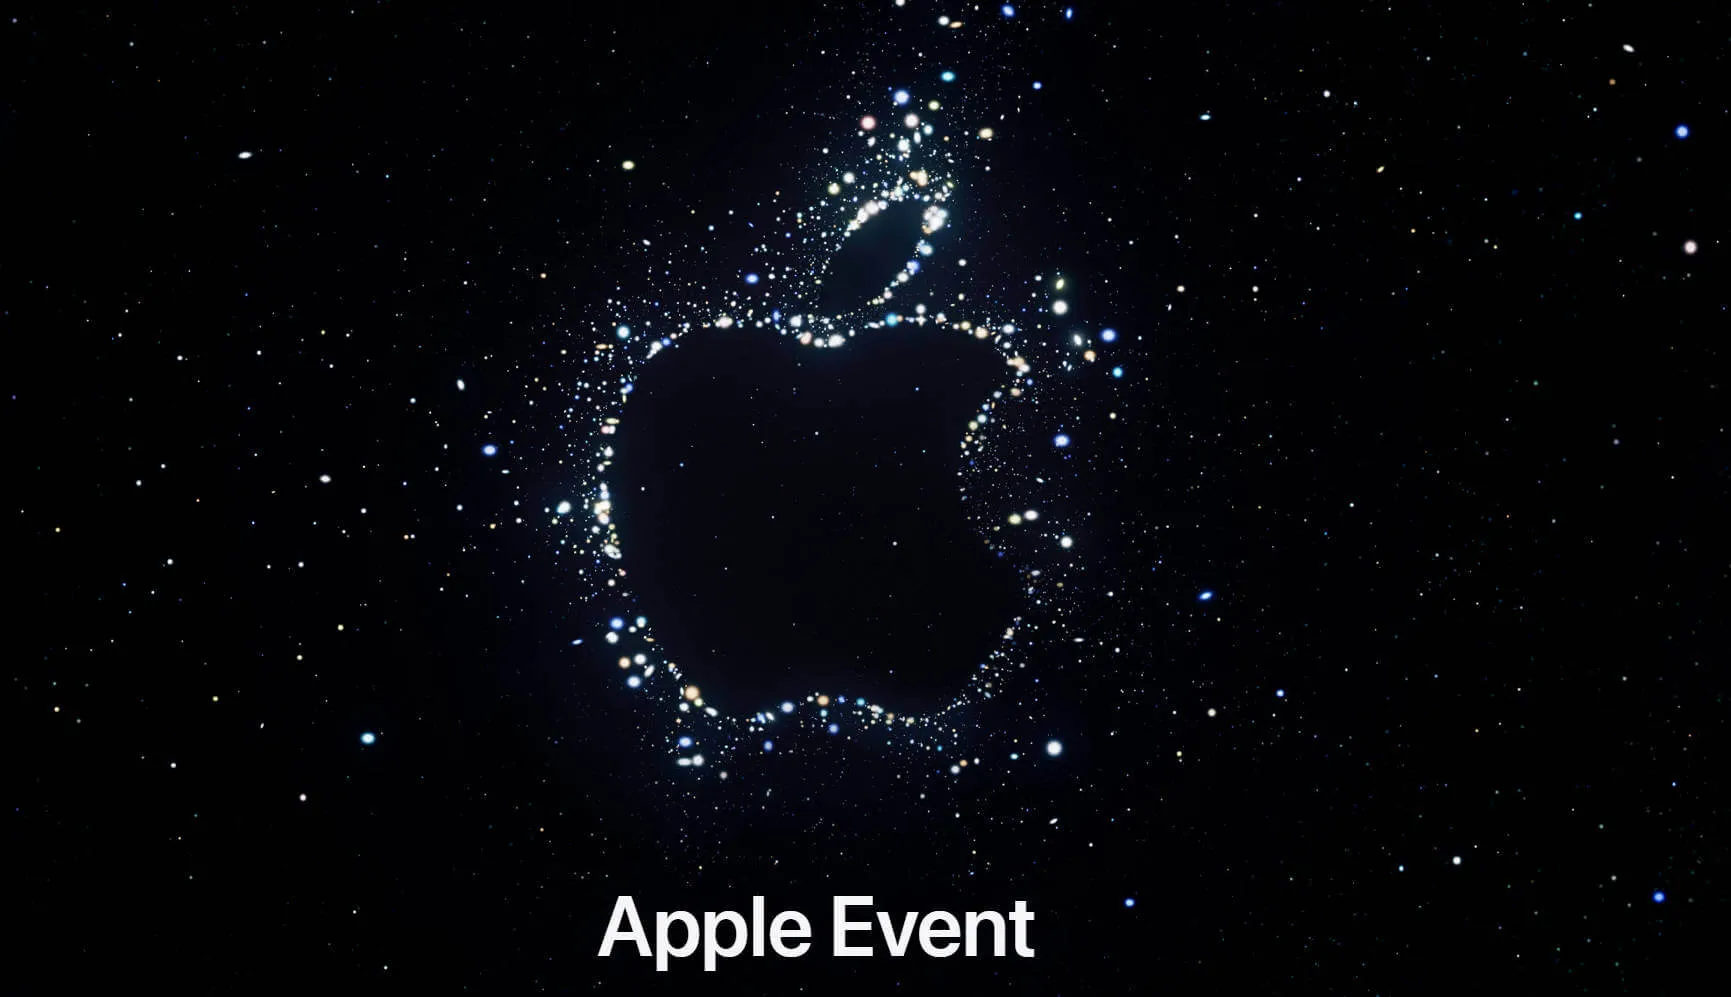 Apple's Far Out Event: What to Expect in Terms of Announcements